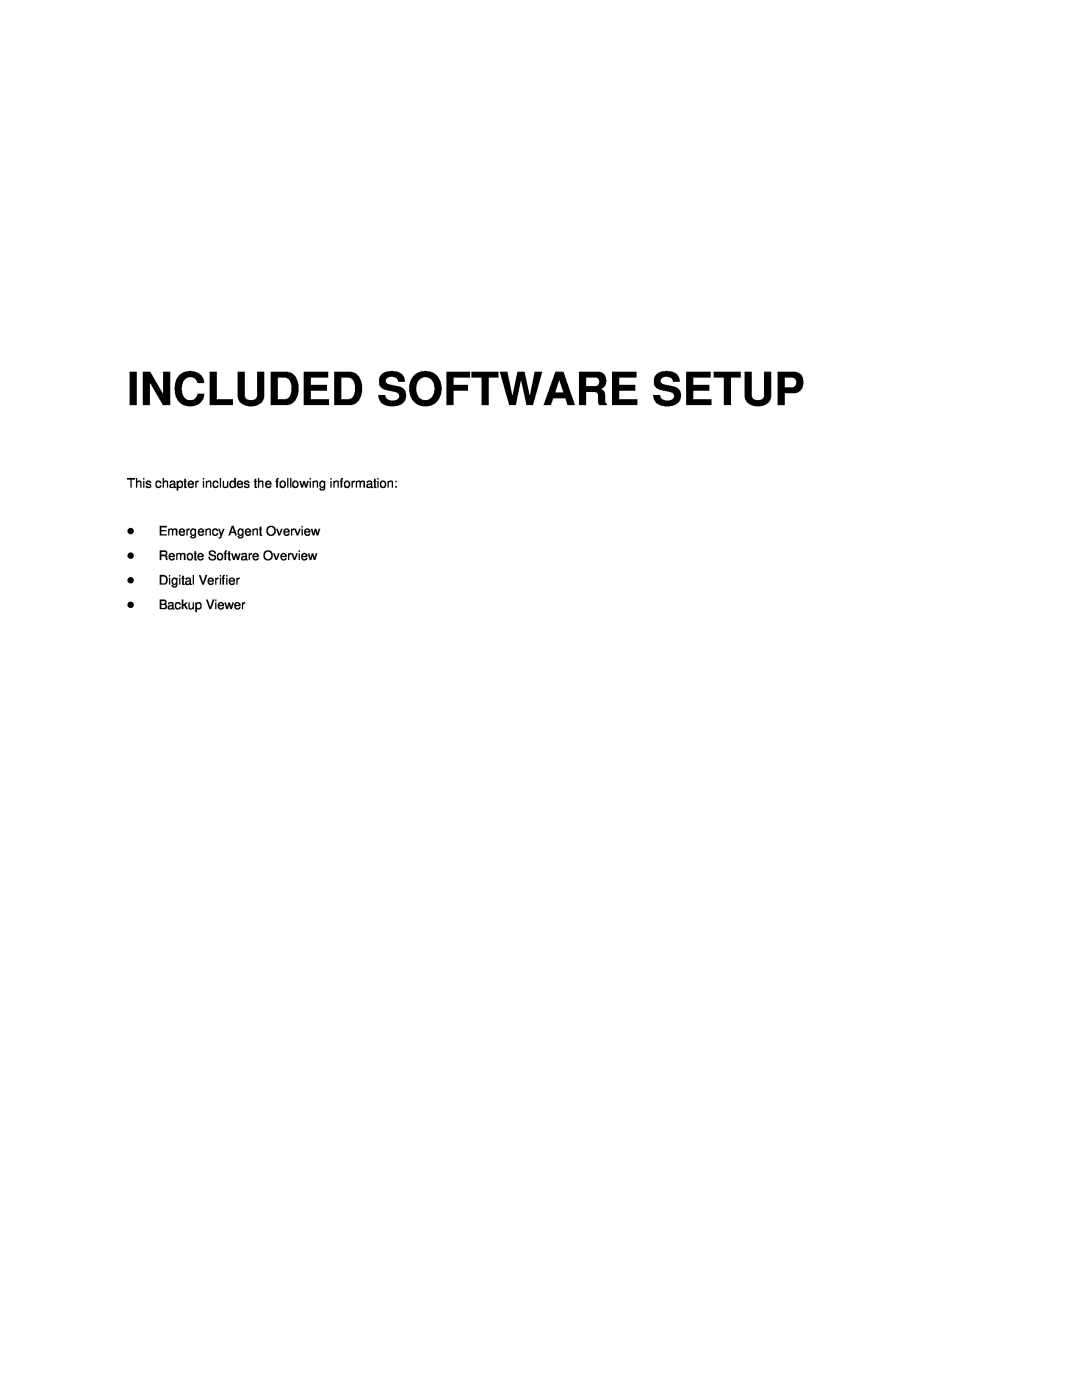 Toshiba NVS8-X, NVS32-X, NVS16-X Included Software Setup, This chapter includes the following information, Backup Viewer 